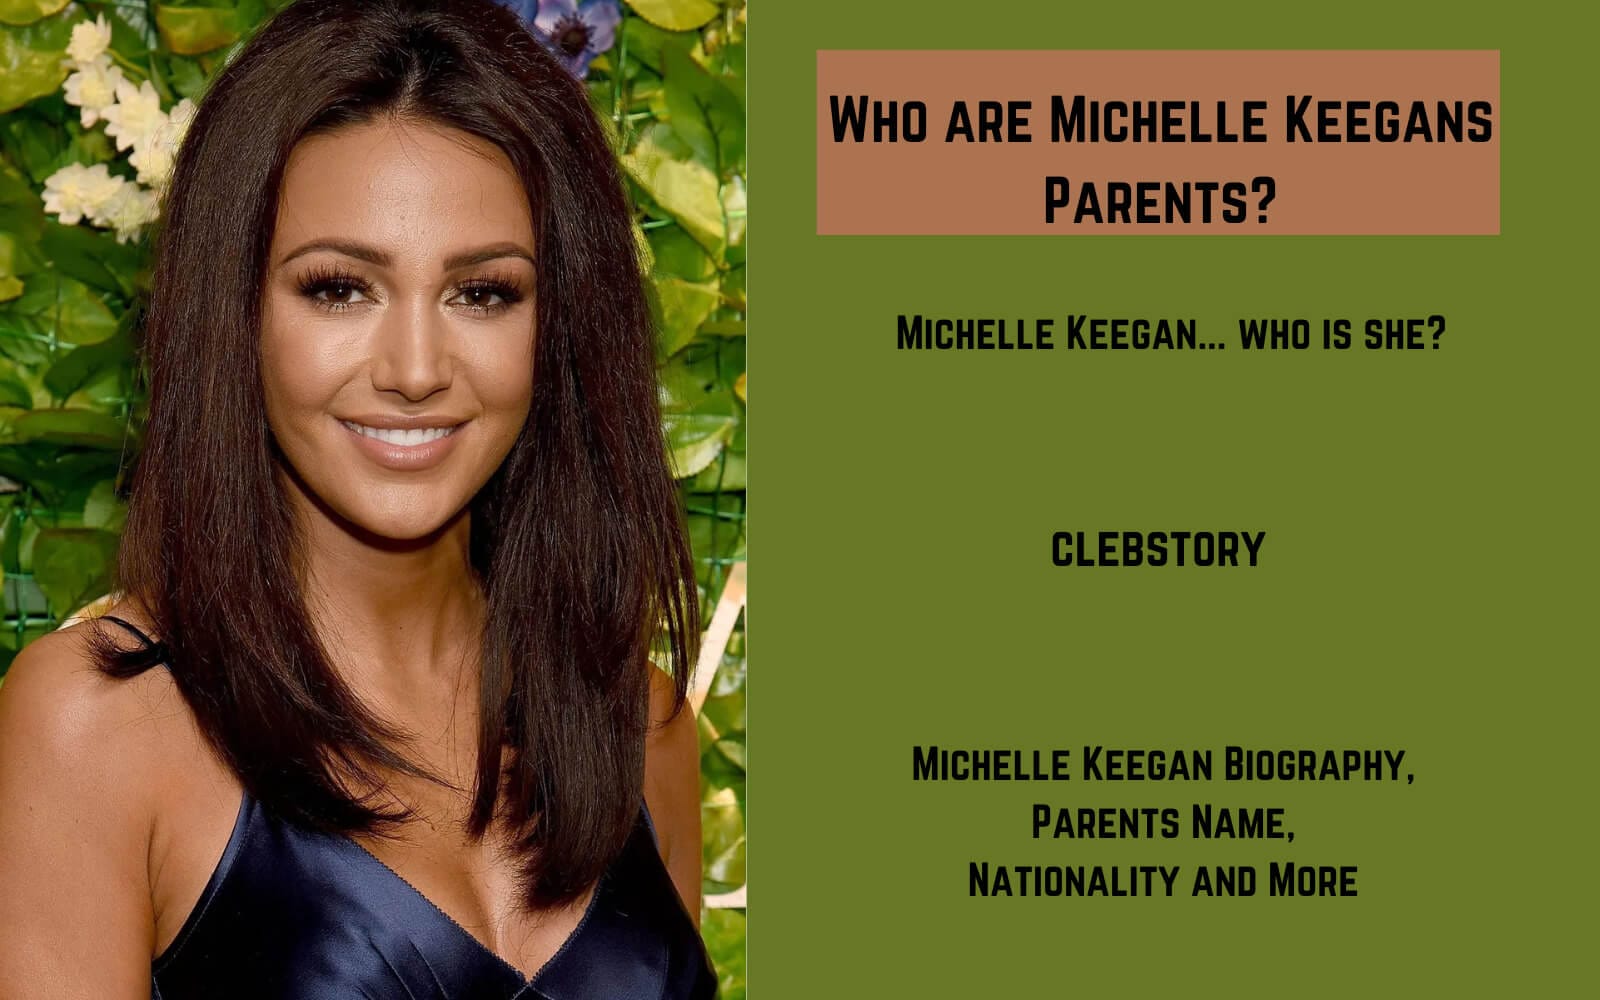 Who are Michelle Keegans Parents